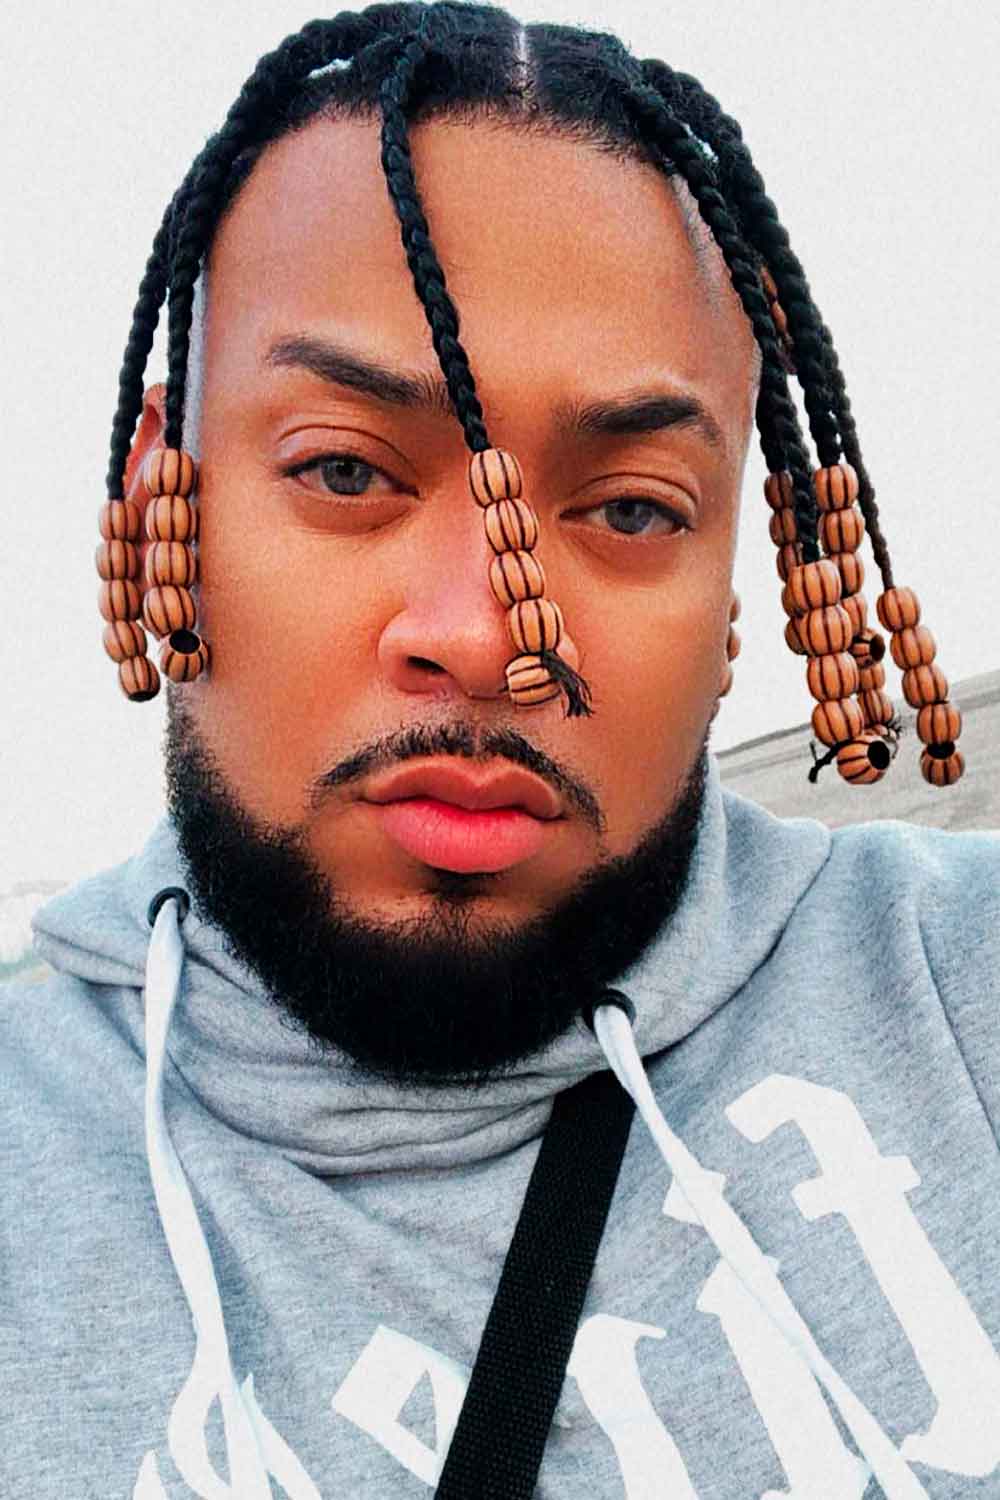 Box Braids for men With Beads #boxbraids #mensbraids #boxbraidsformen #boxbraids